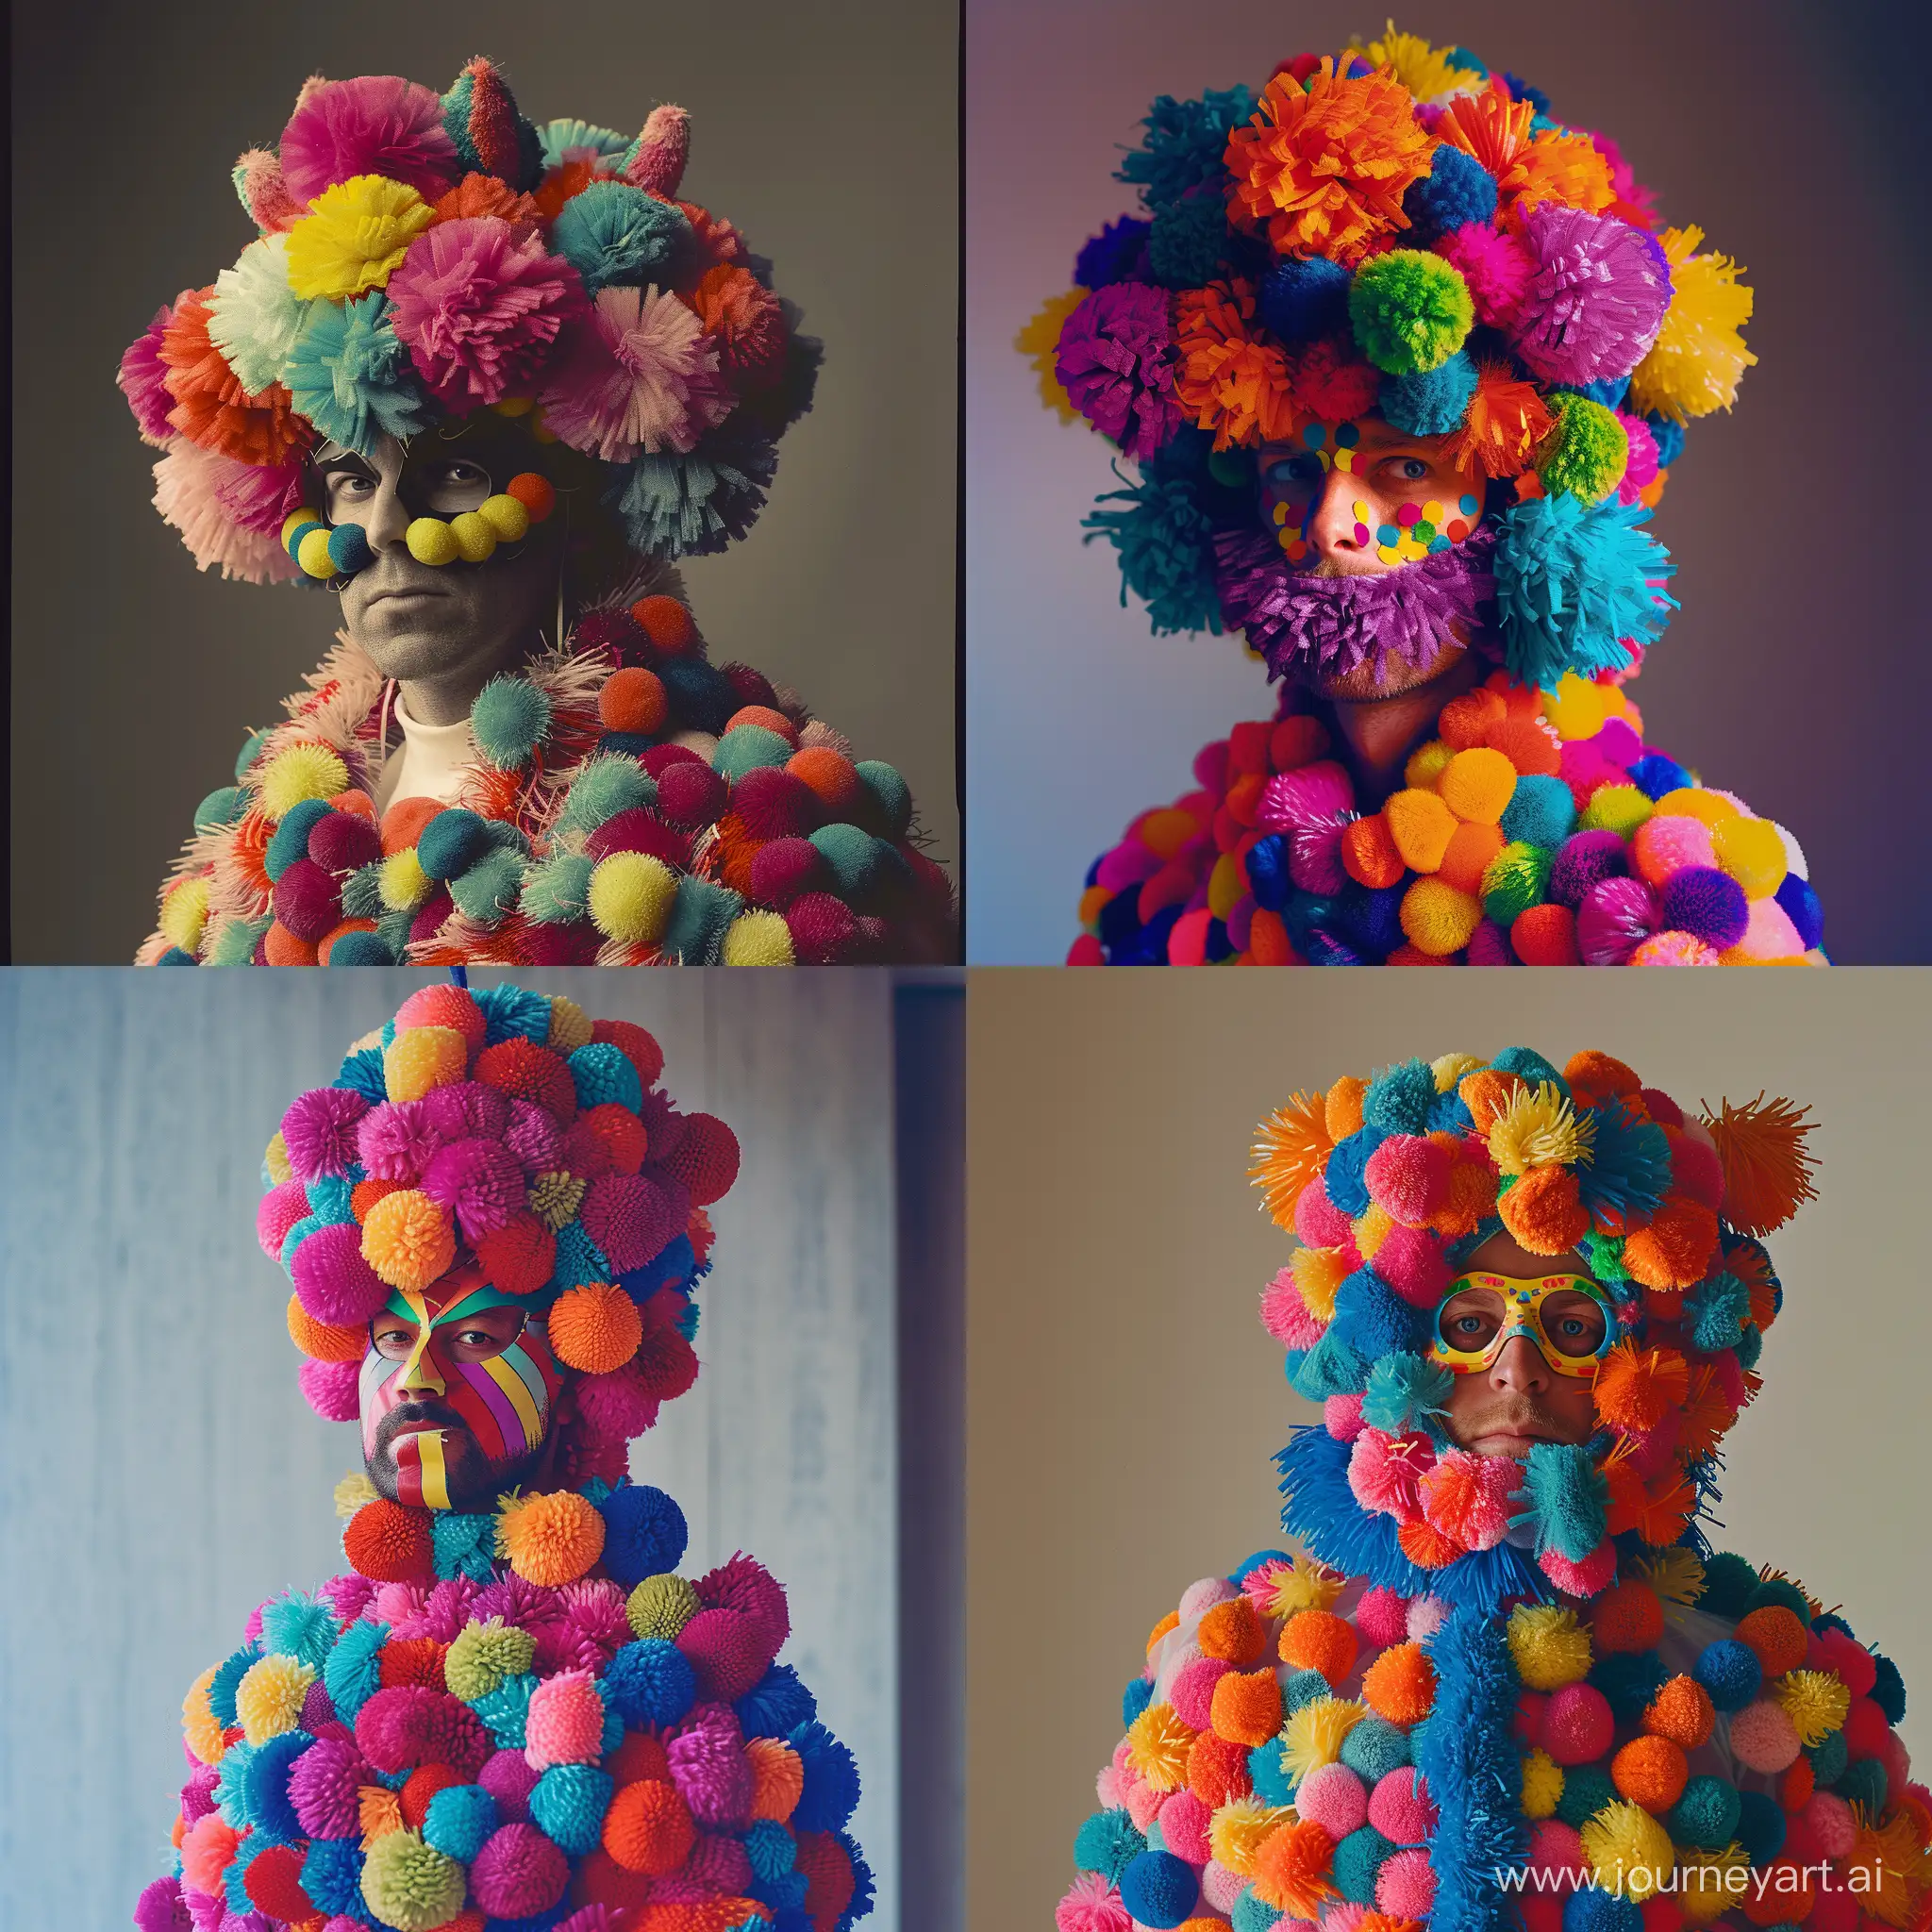 Vibrant-PomPom-Costume-Man-with-Mask-in-Minimalistic-Setting